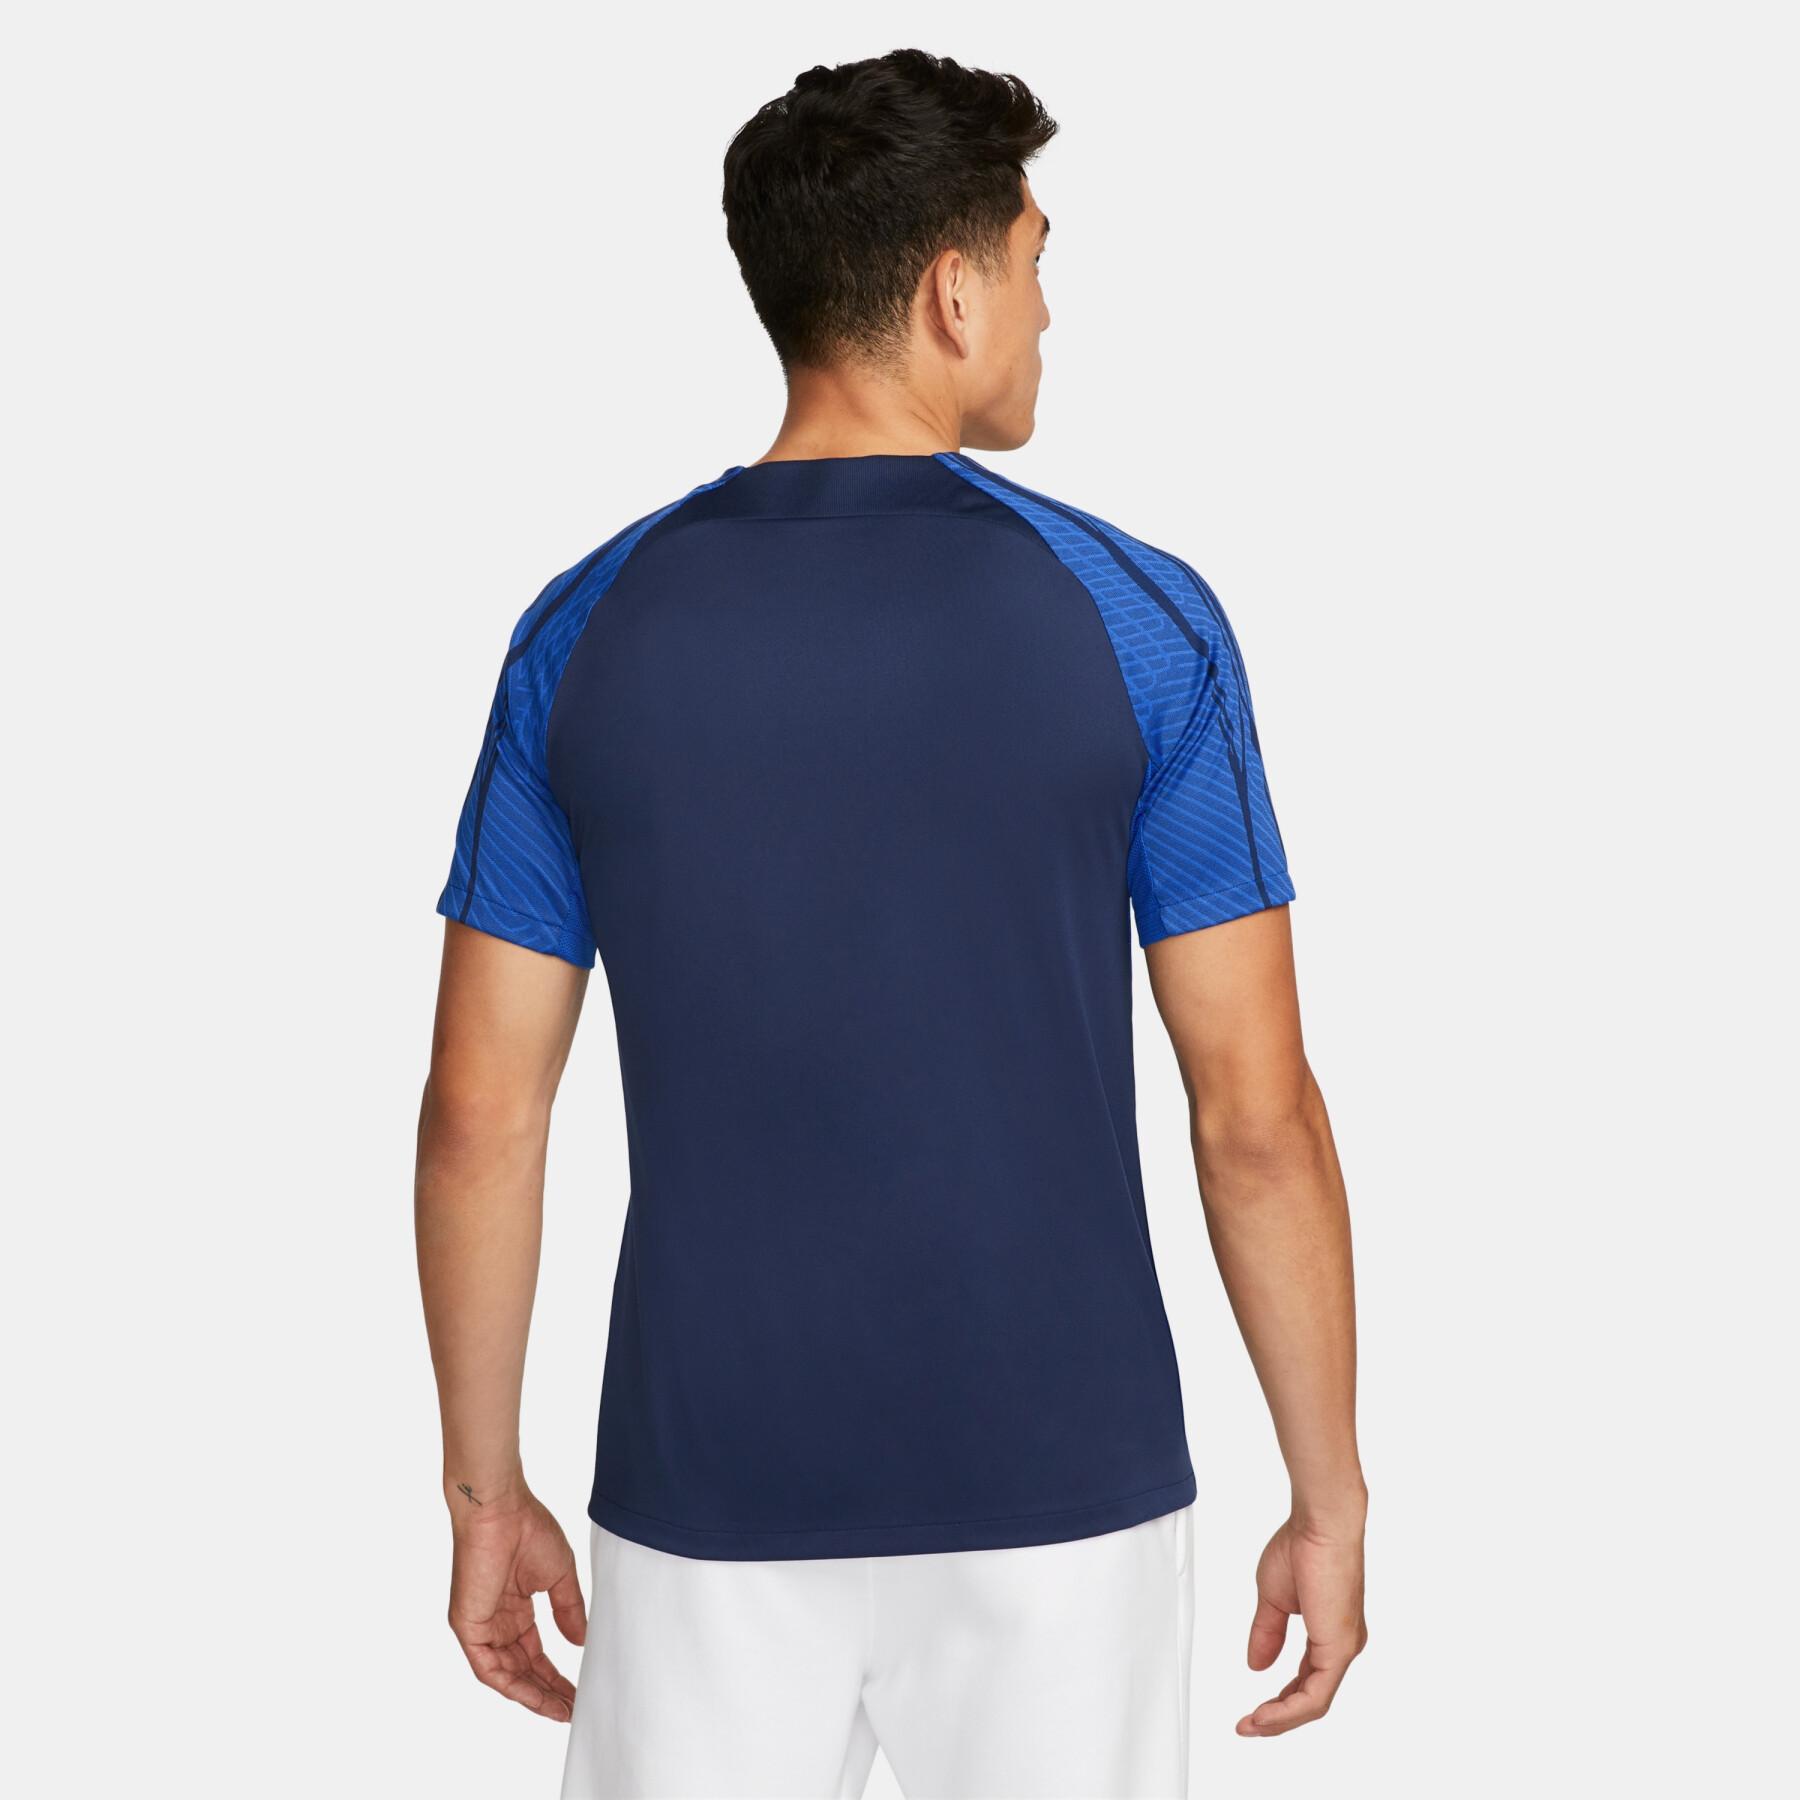 World Cup 2022 training jersey France